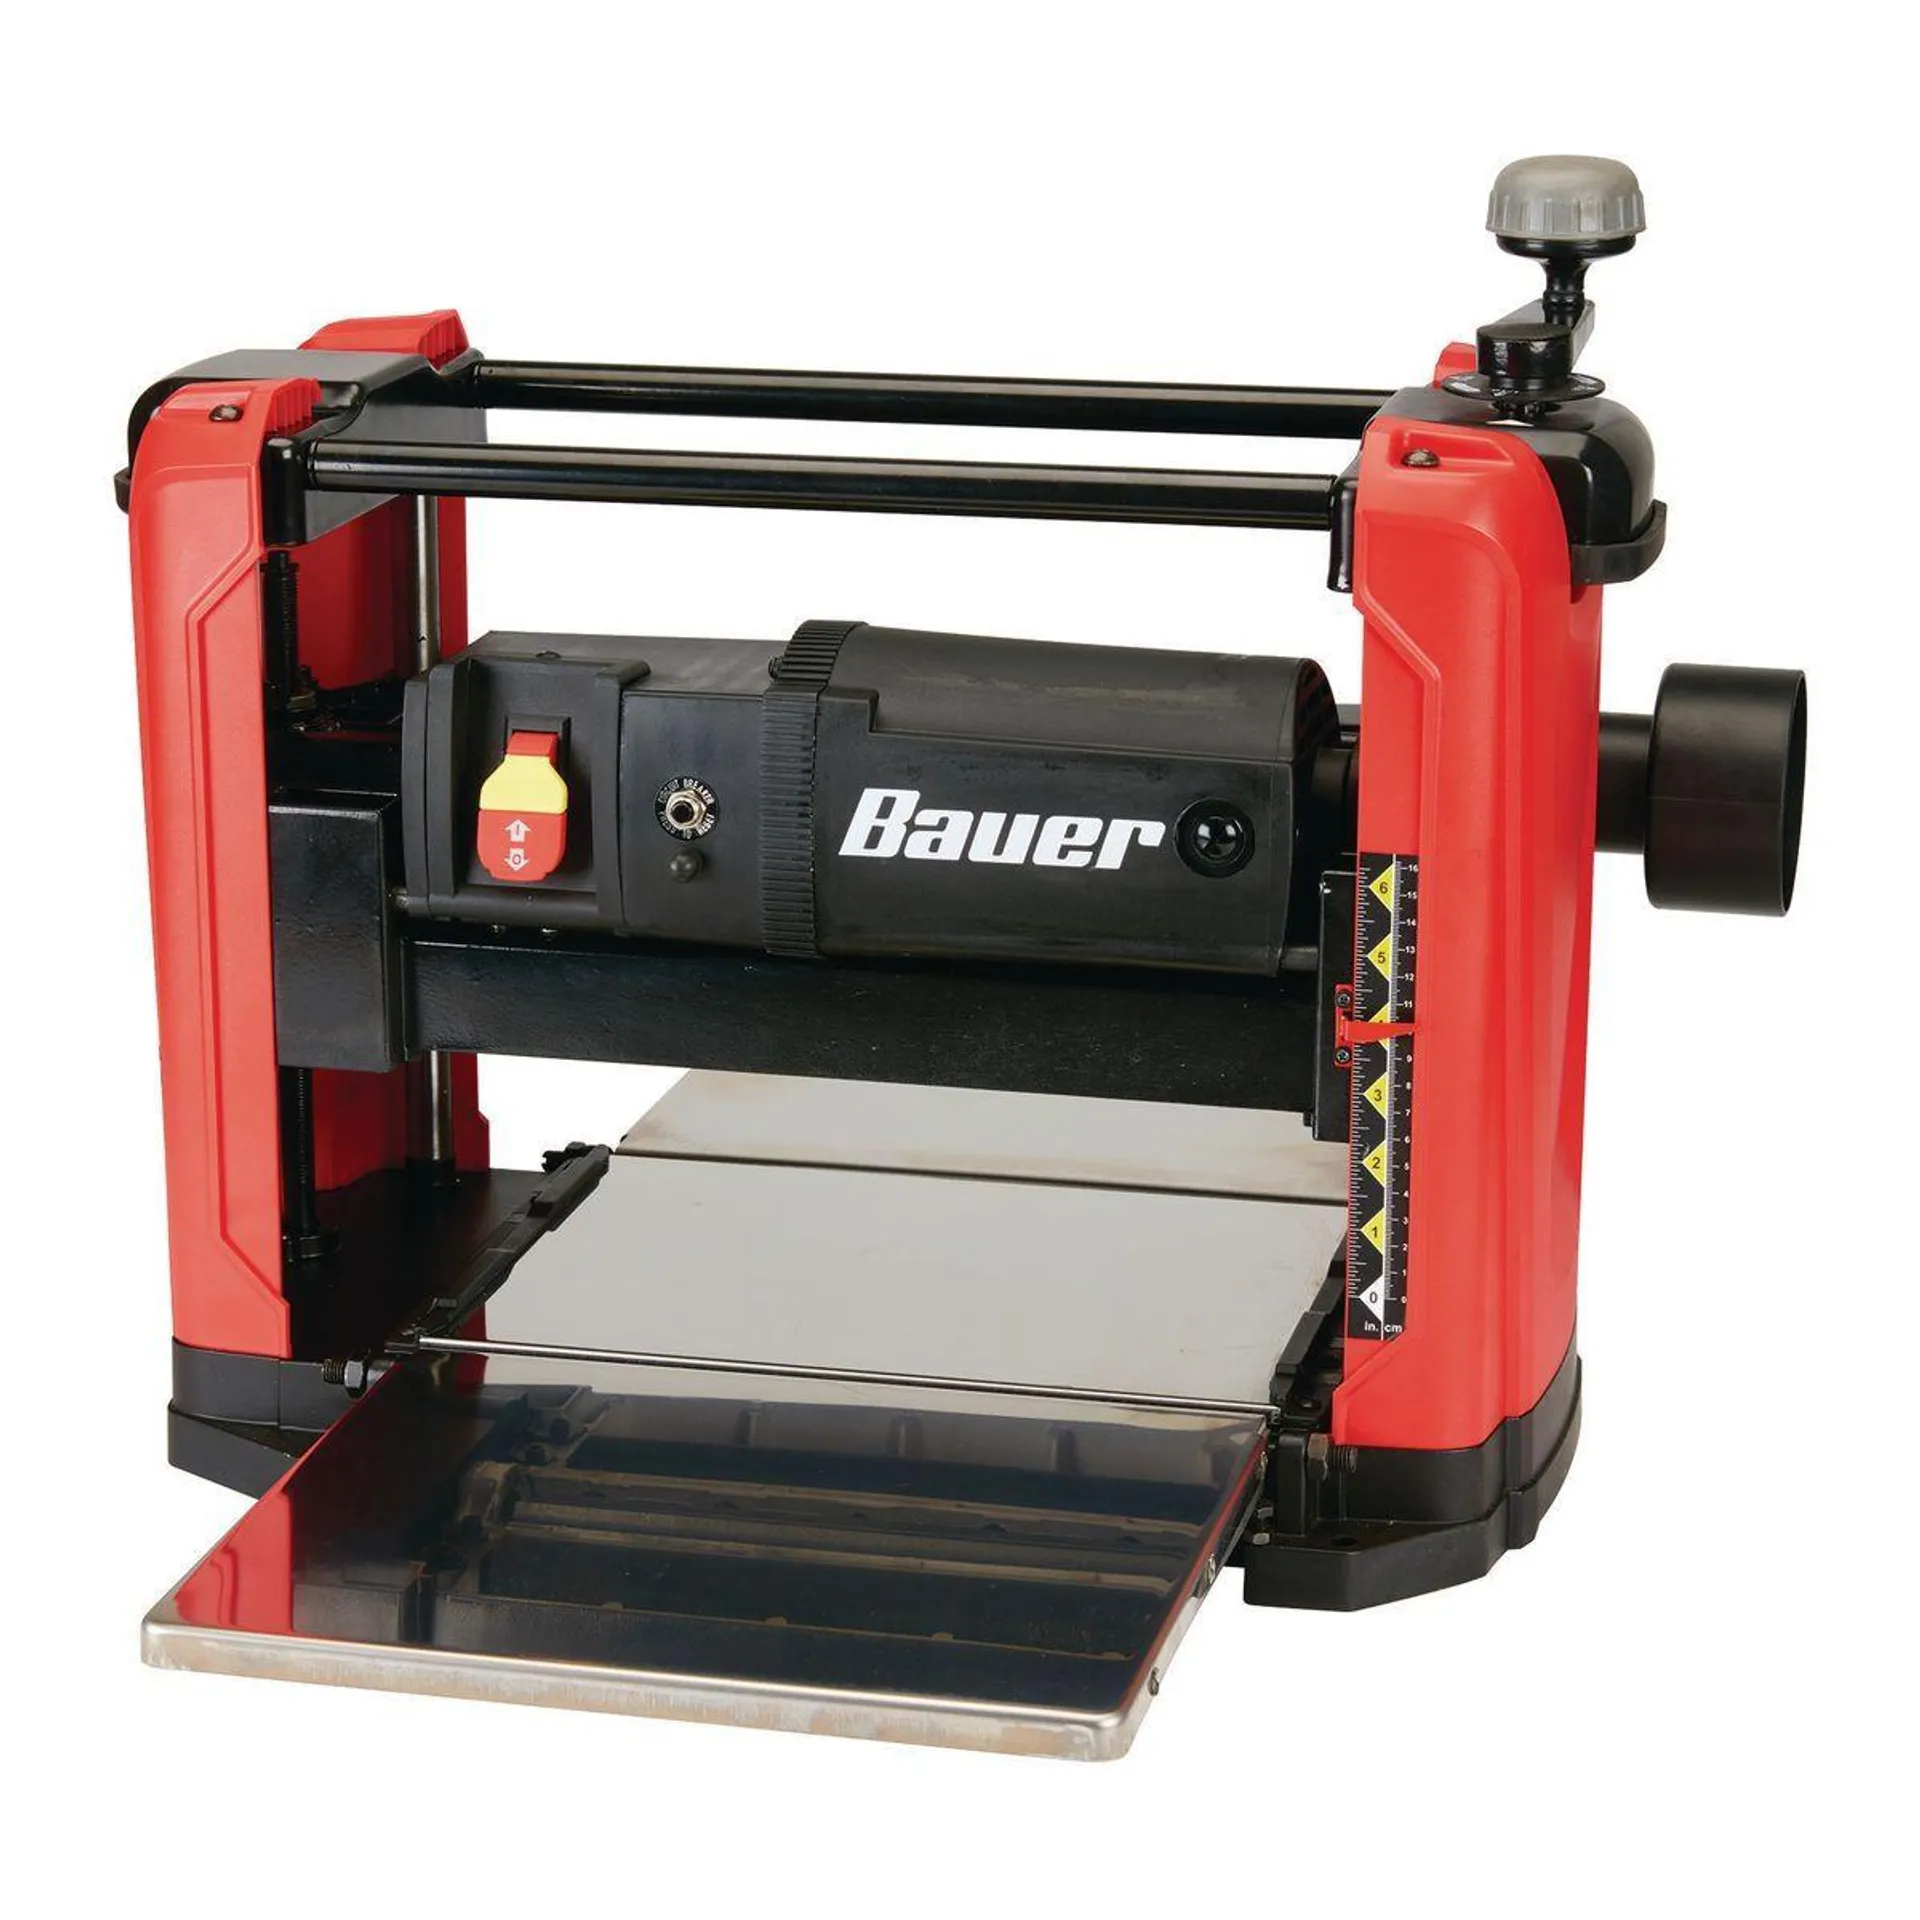 15 Amp 12-1/2 in. Portable Thickness Planer